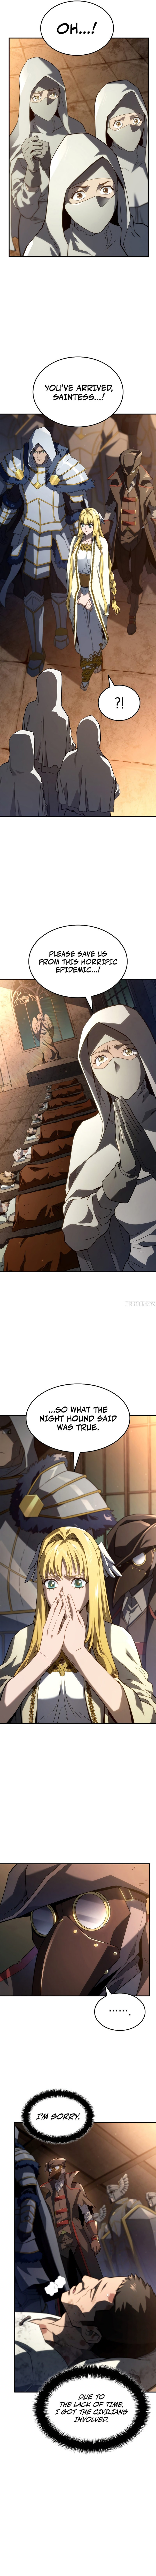 revenge-of-the-iron-blooded-sword-hound-chap-47-10